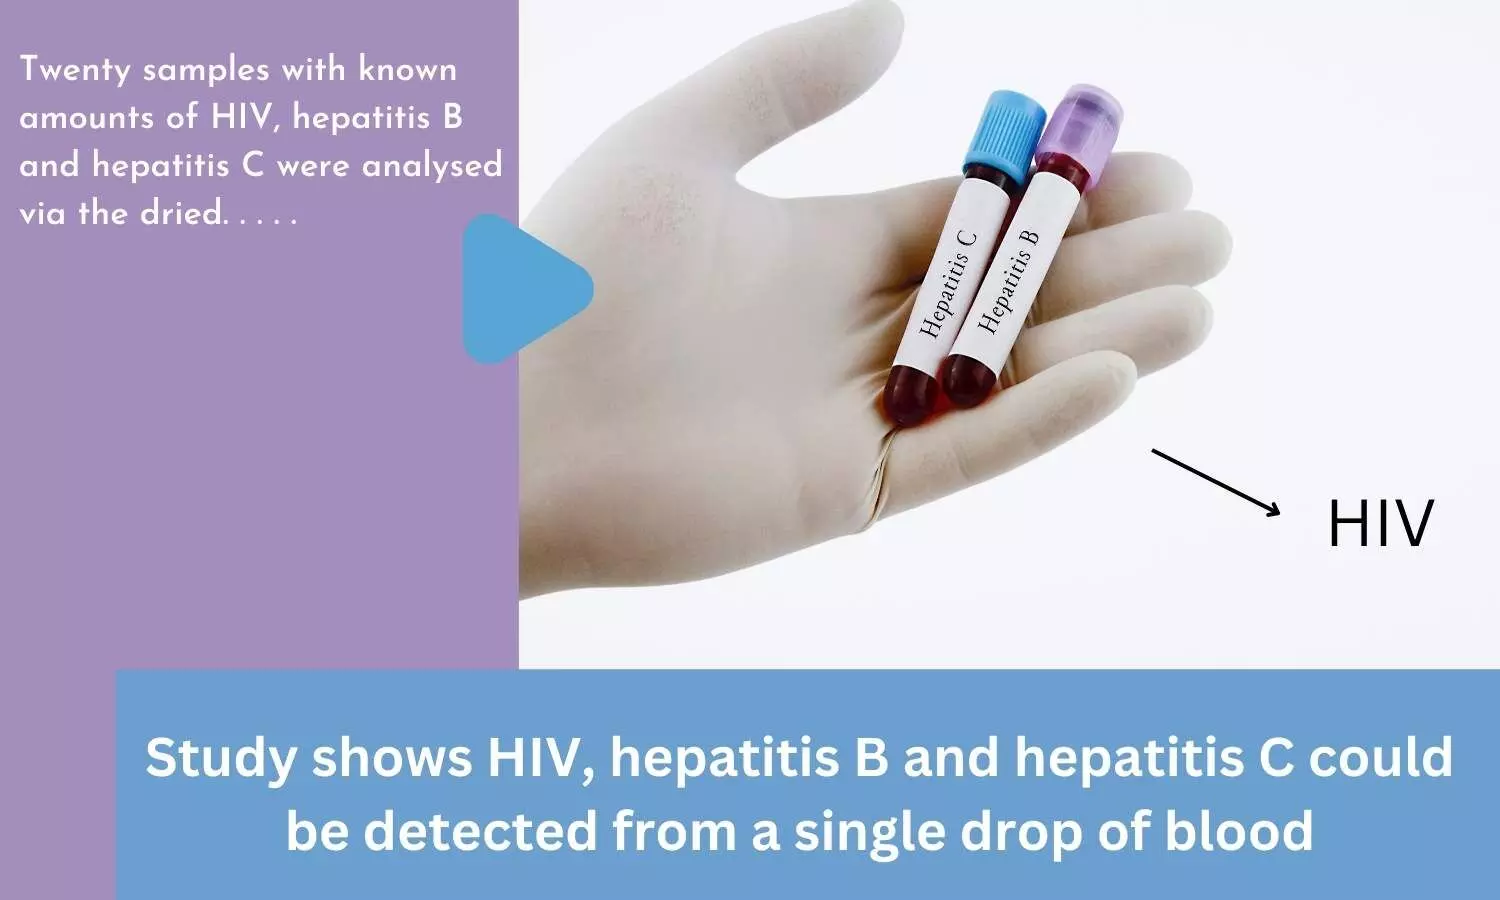 Study shows HIV, hepatitis B and hepatitis C could be detected from a single drop of blood